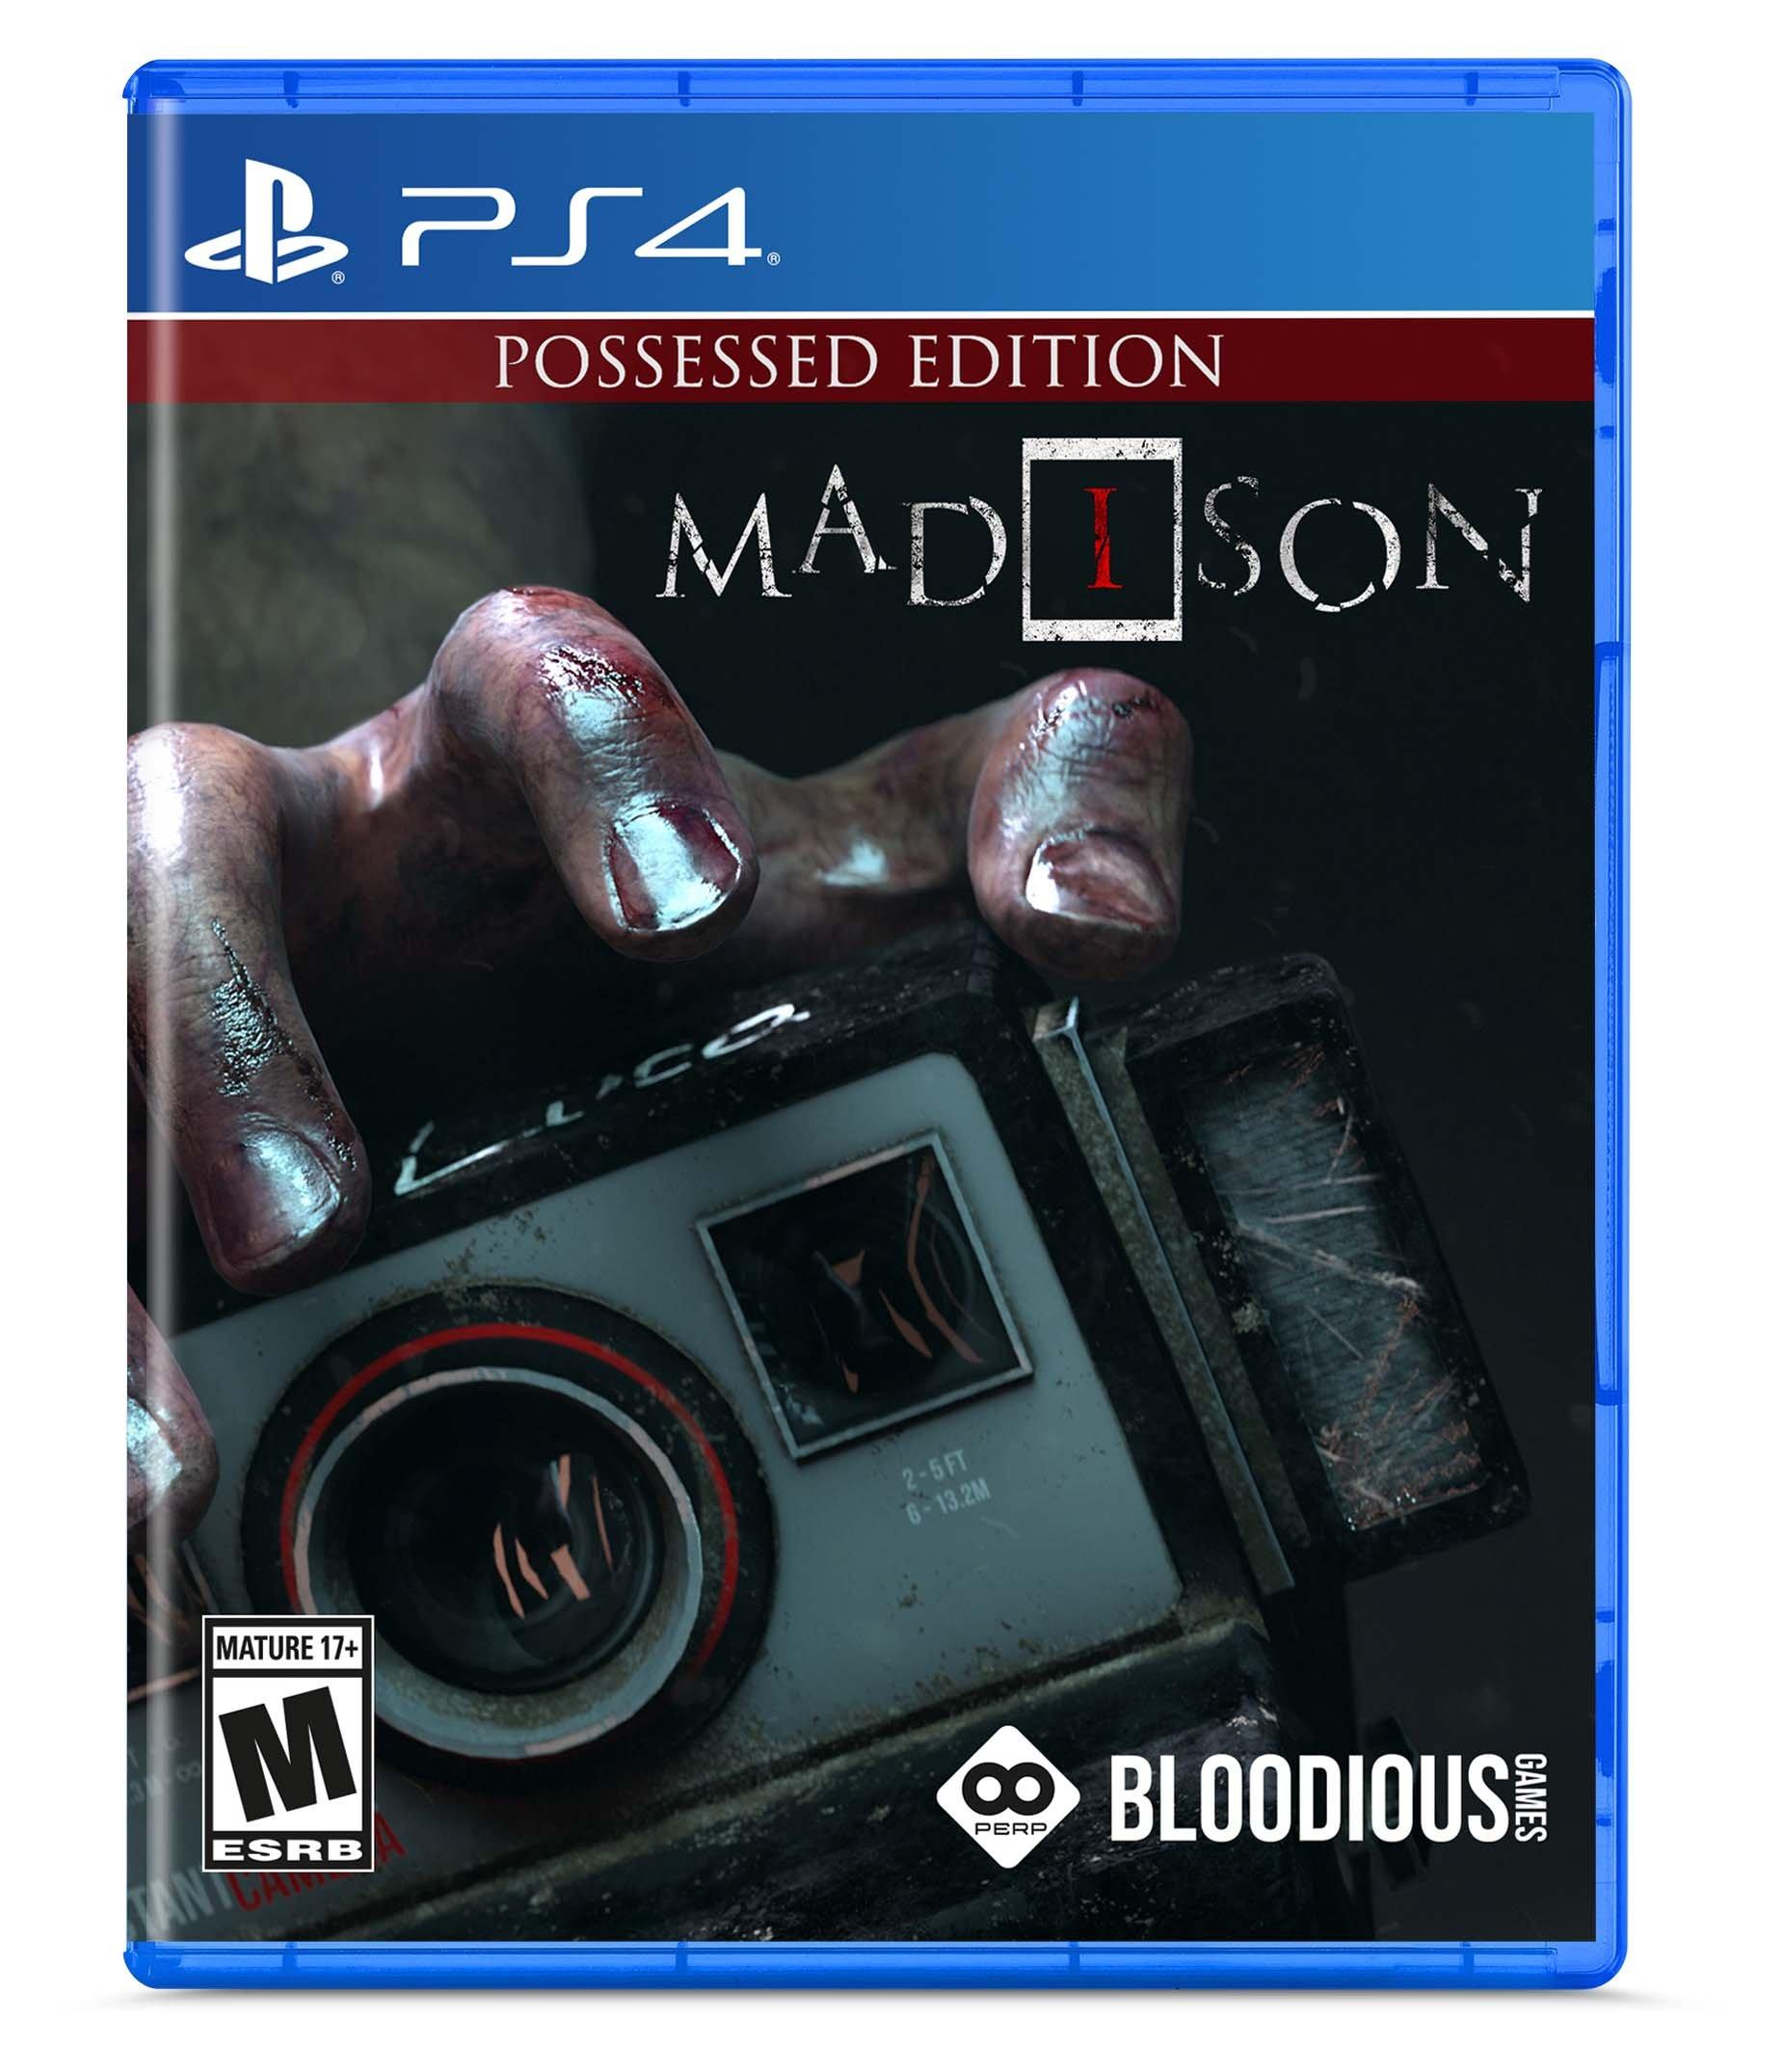 MADiSON: The Possessed Edition - PlayStation 4